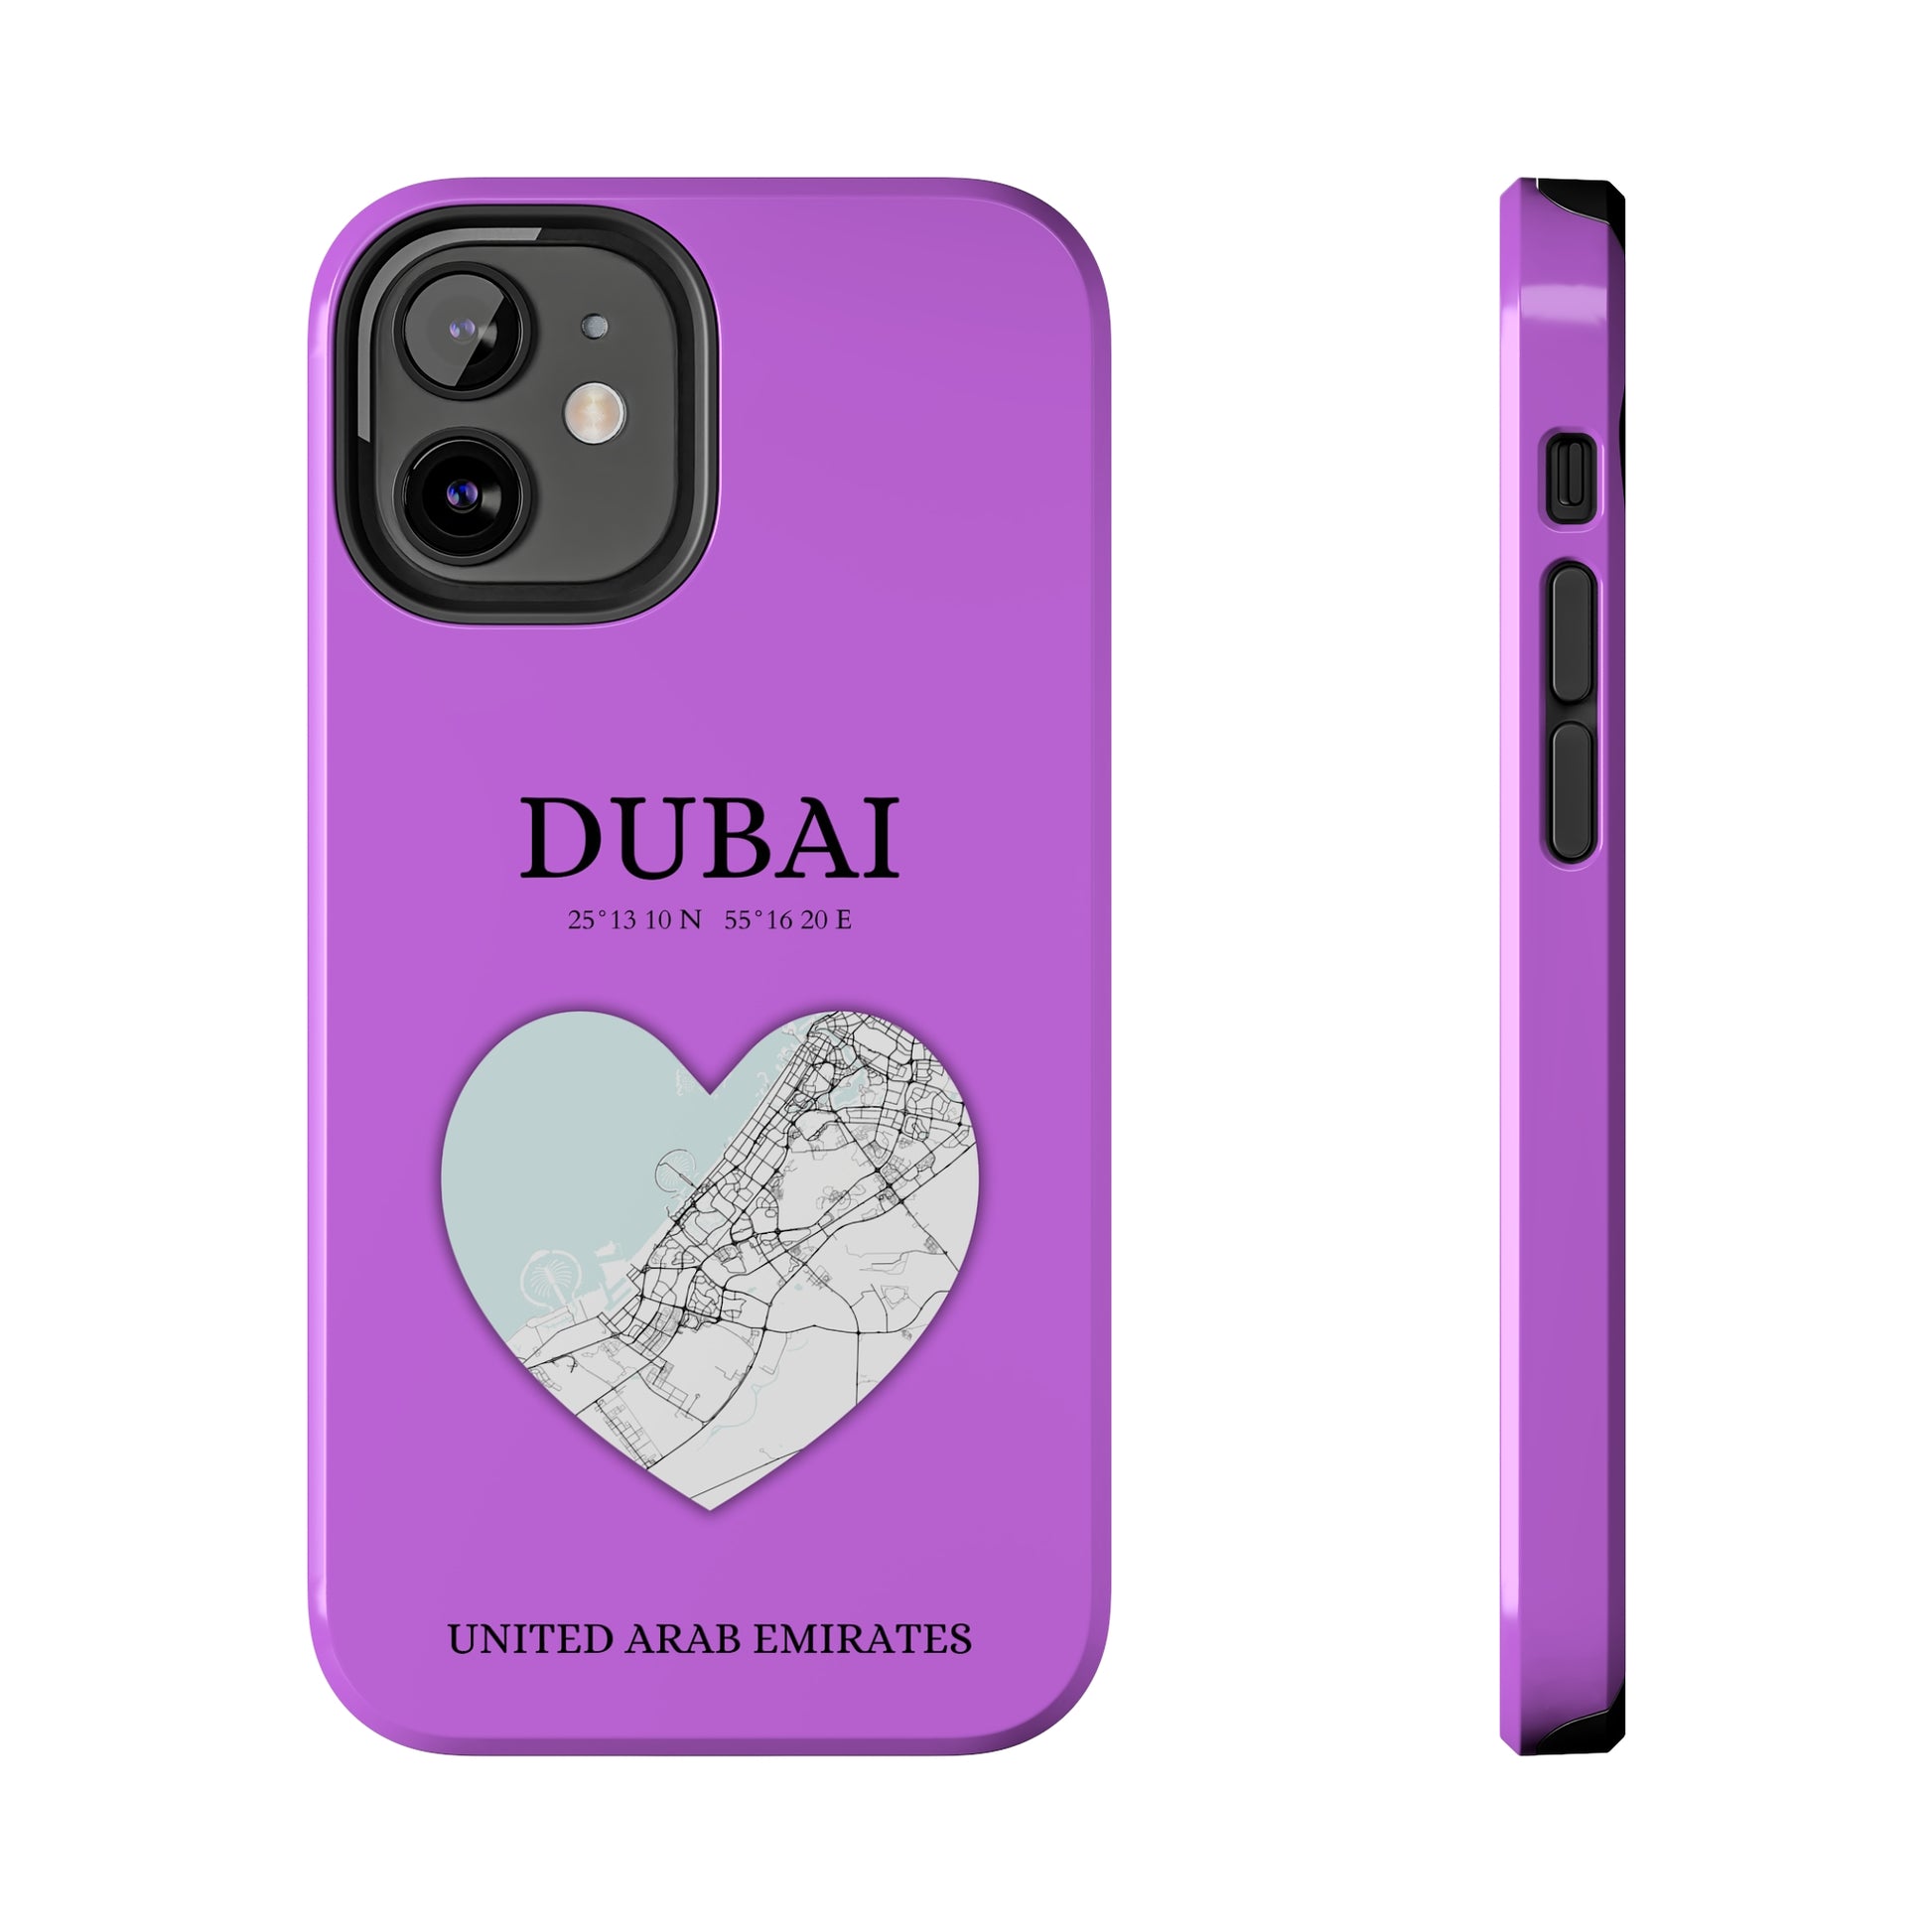 Dubai Heartbeat - Purple (iPhone Case 11-15)Elevate your iPhone with RimaGallery's Dubai York Heartbeat case. Sleek design meets durability for stylish protection. Free US shipping.RimaGallery